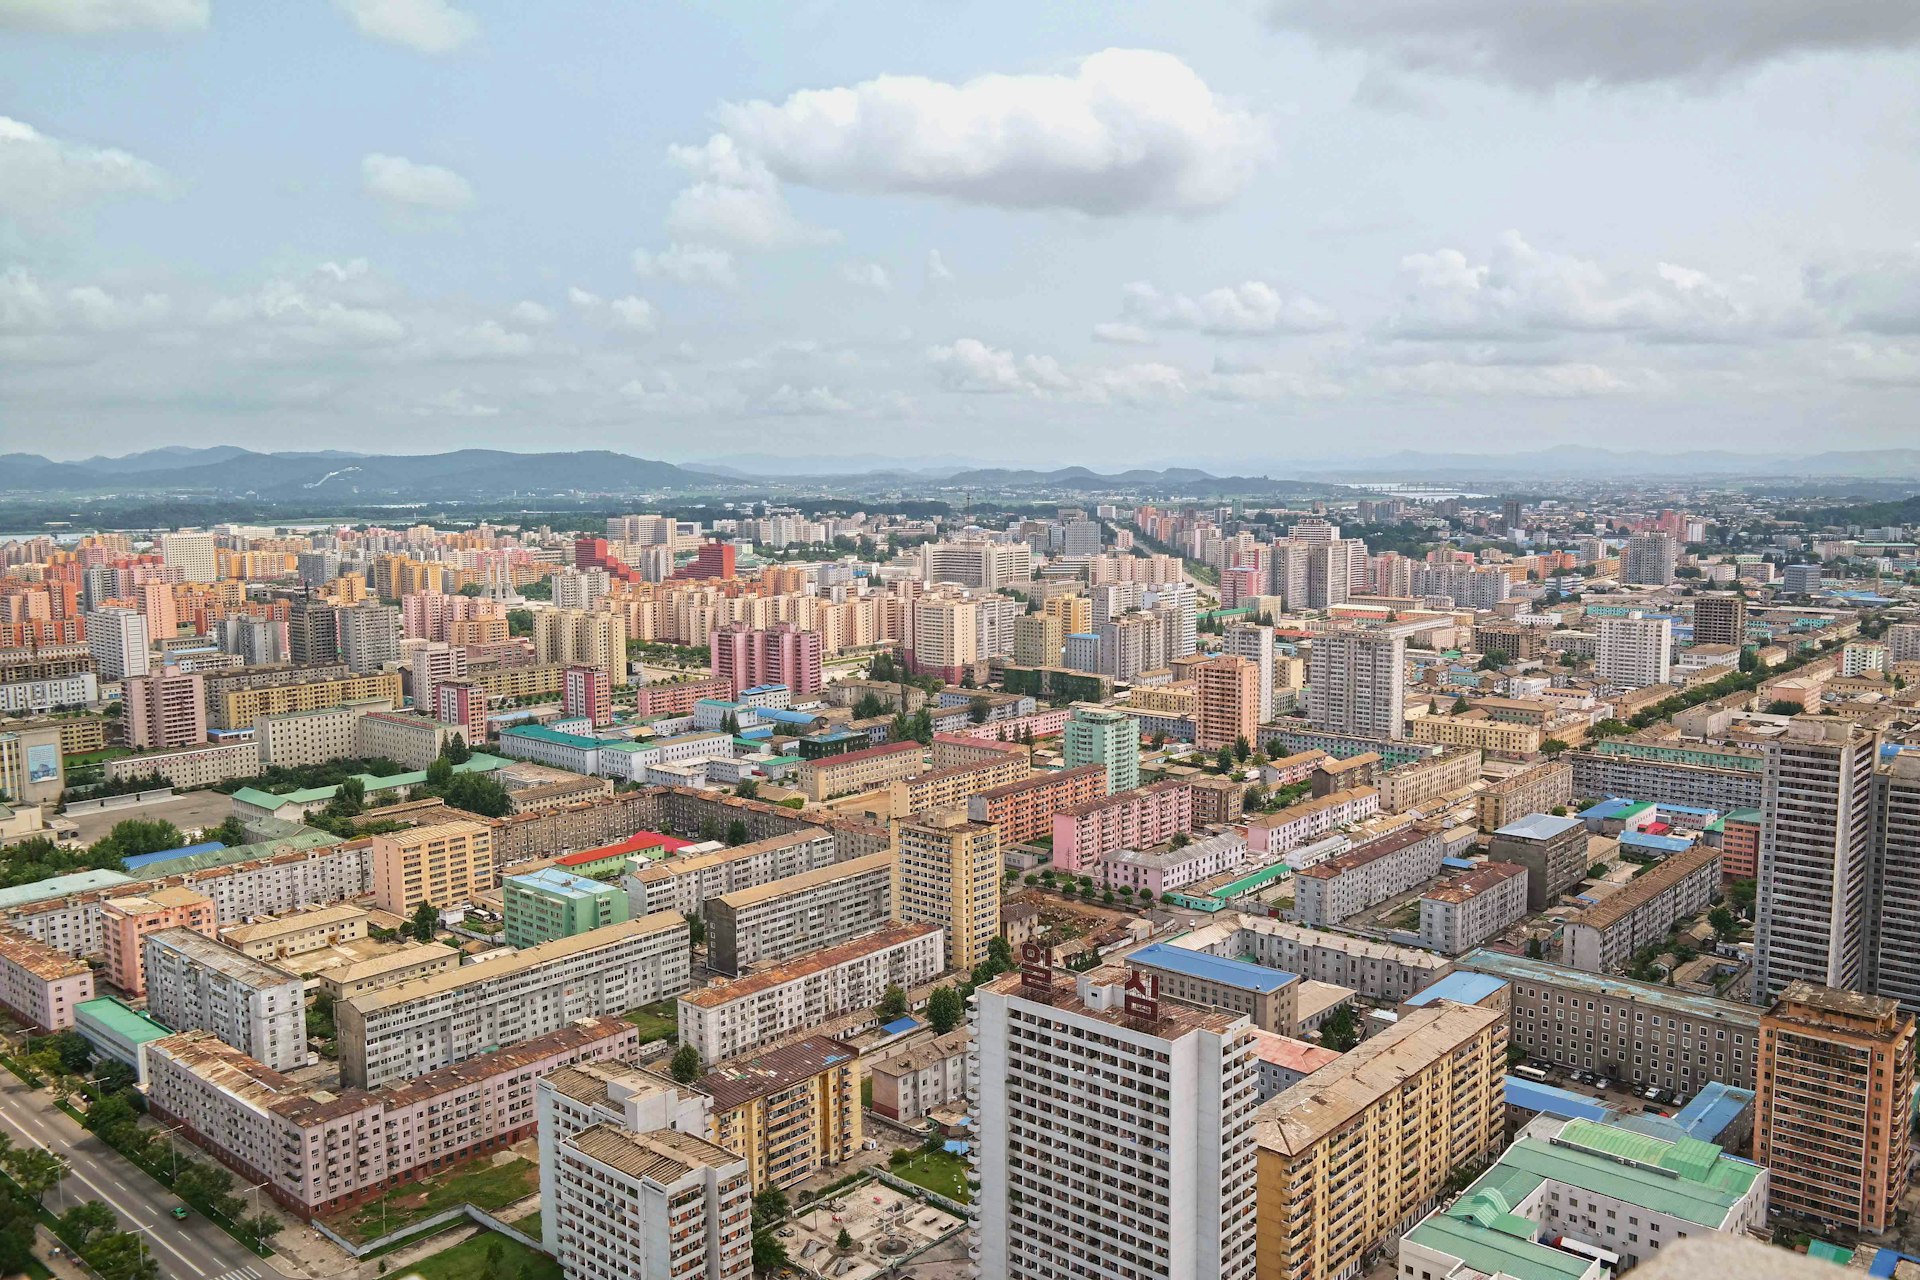 View from the top of the Tower of the Juche Idea in Pyongyang. The North Korean capital stretches out beneath you as a pastel-coloured panorama, a rolling field of tower blocks painted in terracotta and yellow ochre, turquoise and baby blue – a distinctive colour palette that recurs throughout the country’s architecture and interiors.